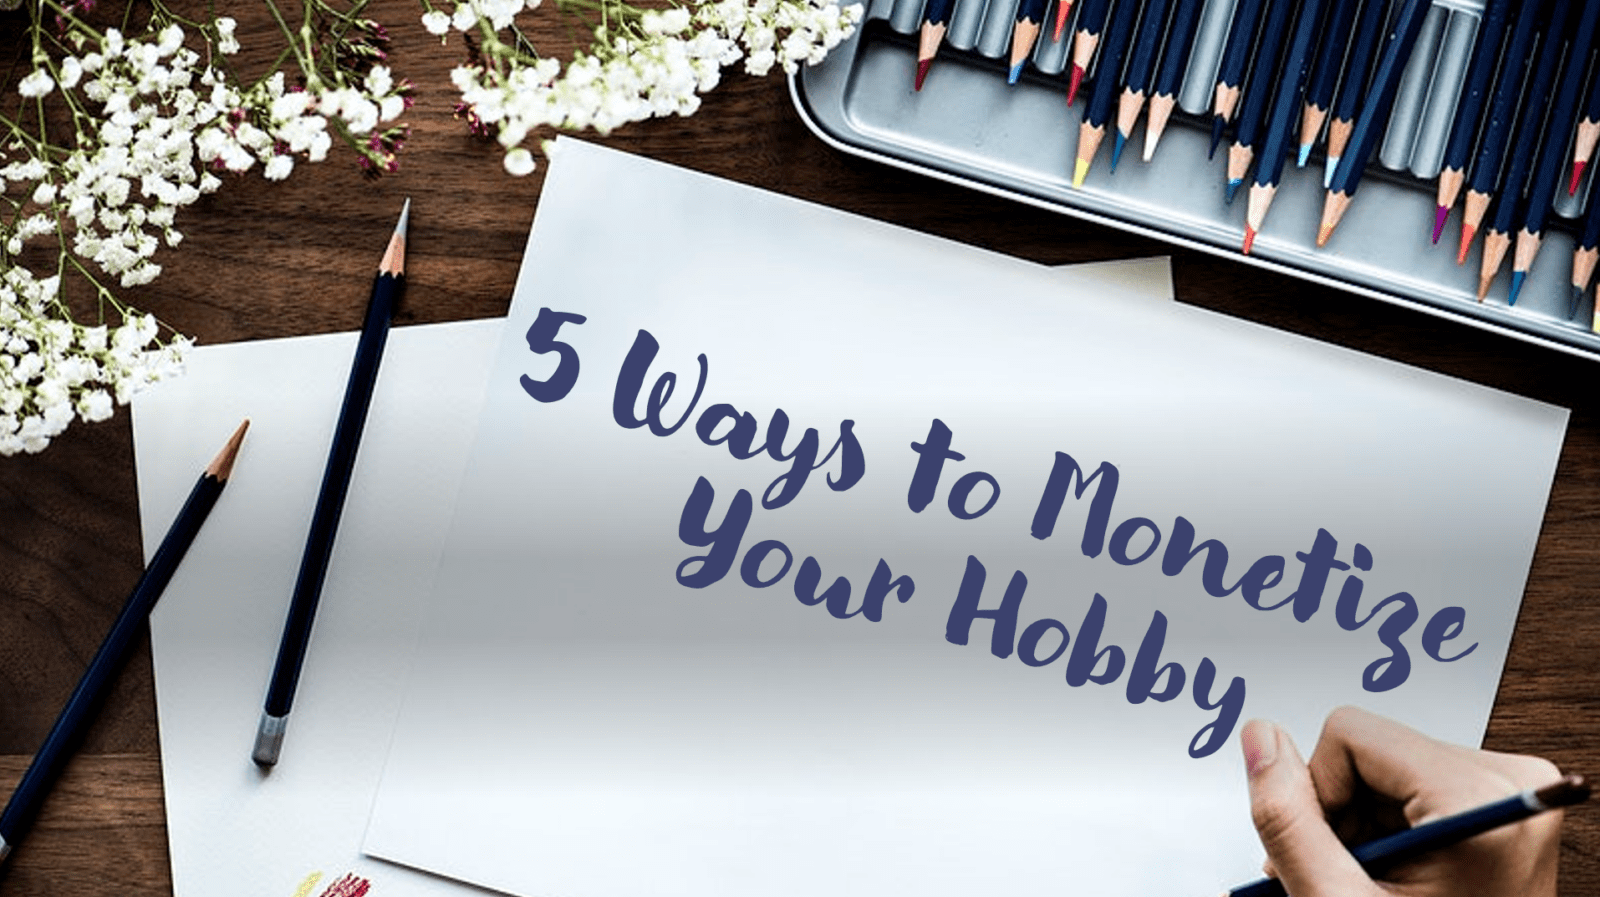 5 Ways to Monetize Your Hobby